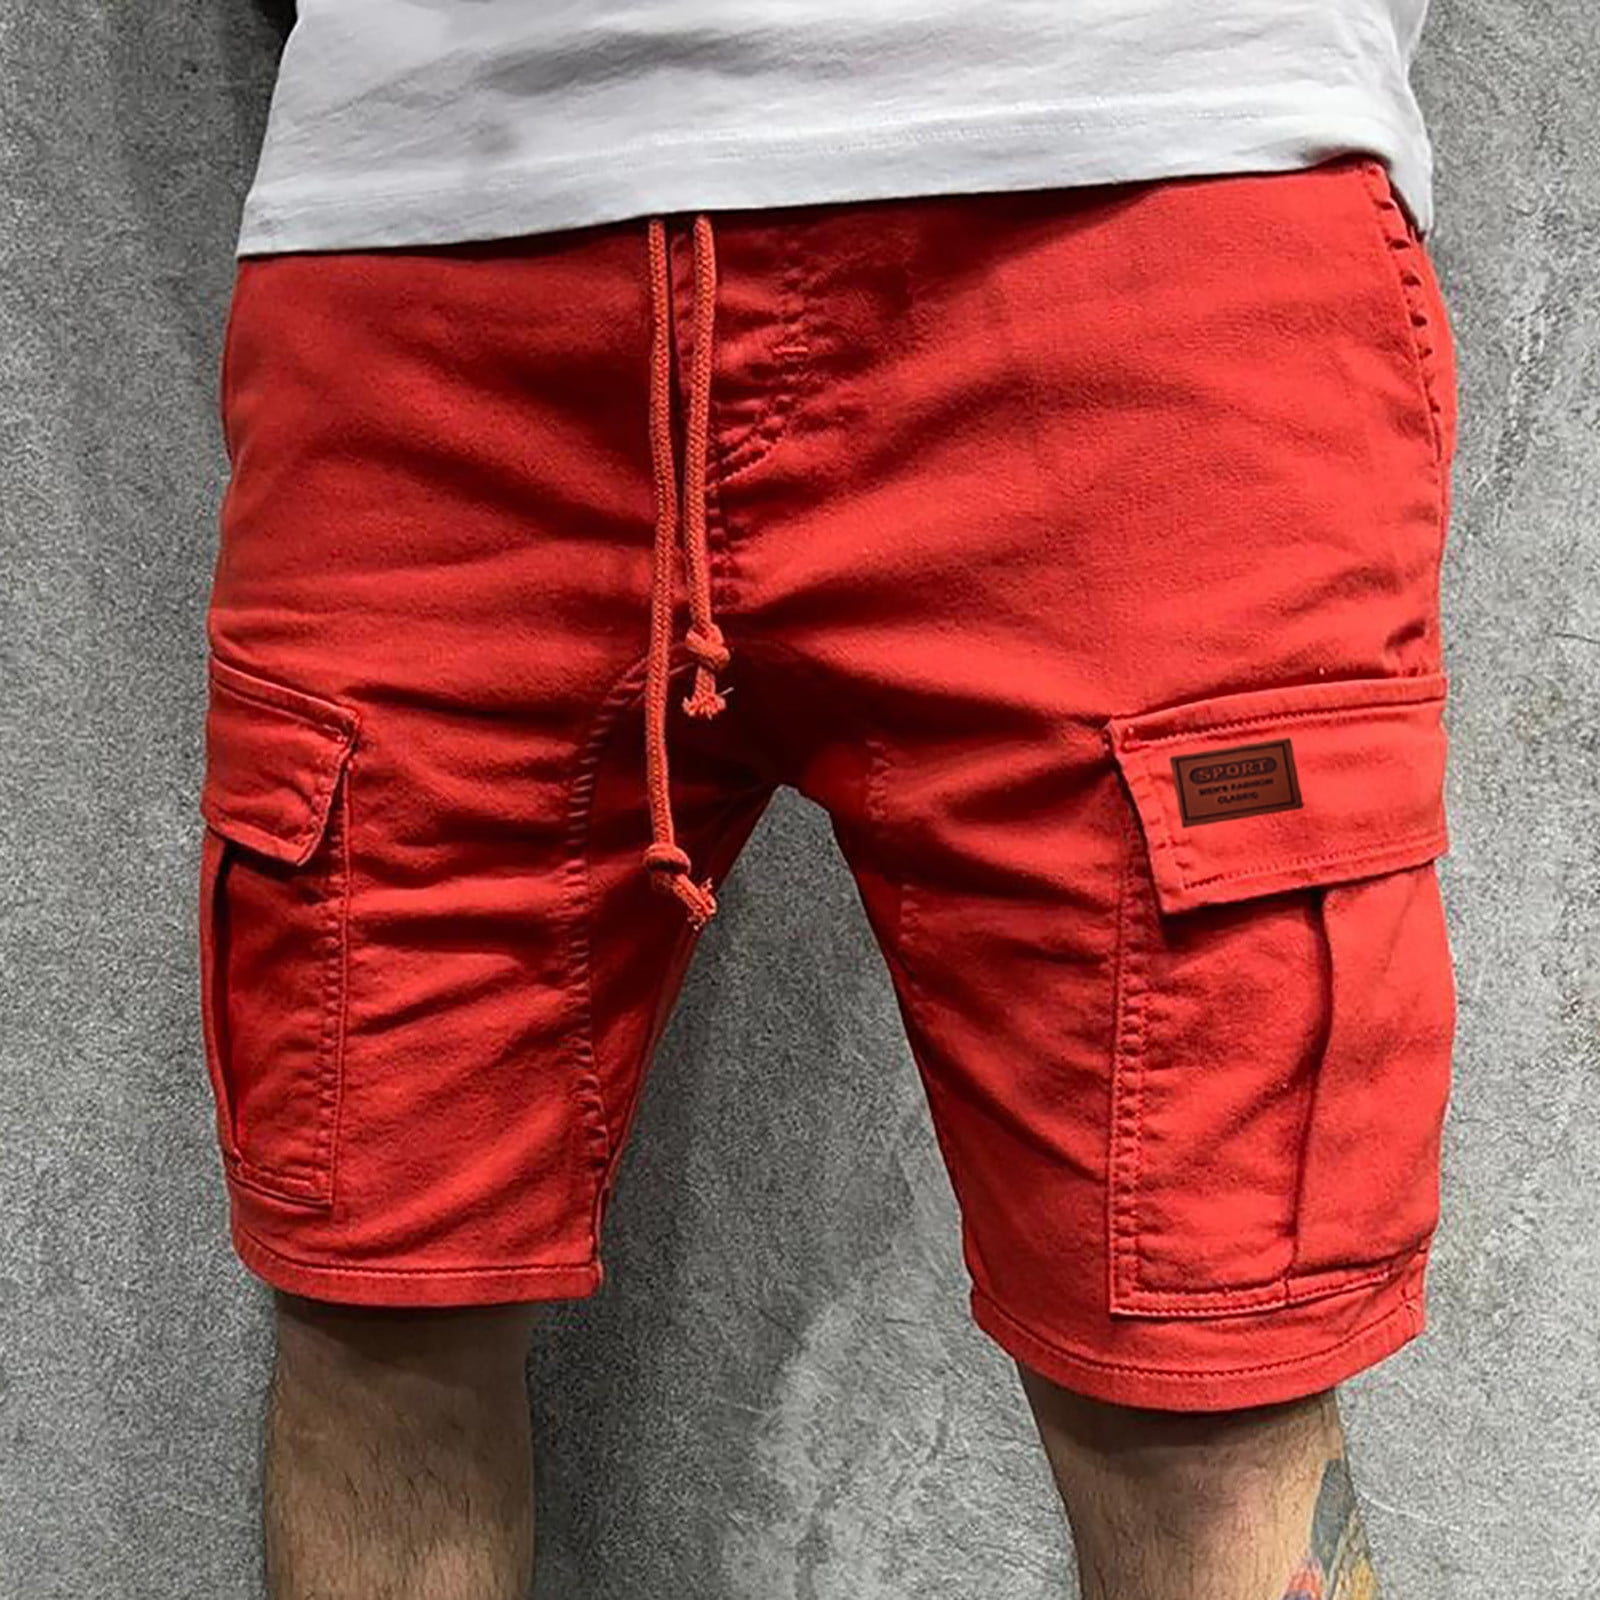 jsaierl Cargo Shorts for Men Big and Tall Multi Pockets Shorts Work ...